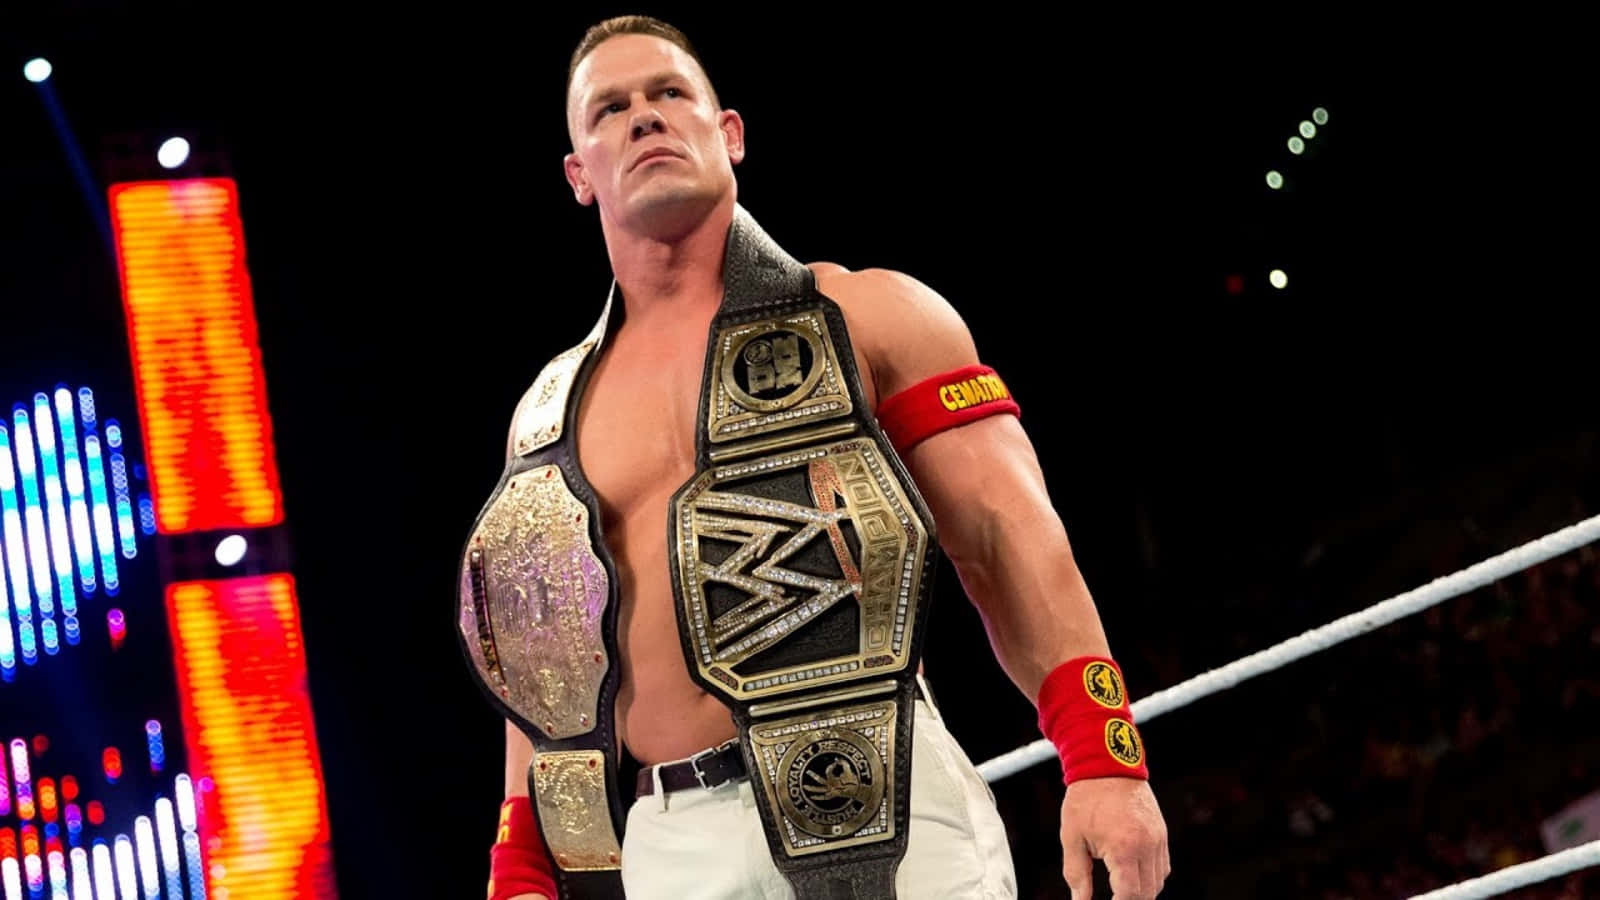 John Cena Talks Tying Ric Flair's Title Record, AJ Styles, Being Healthy  For Wrestlemania, The Patriots' Super Bowl Win - Wrestlezone